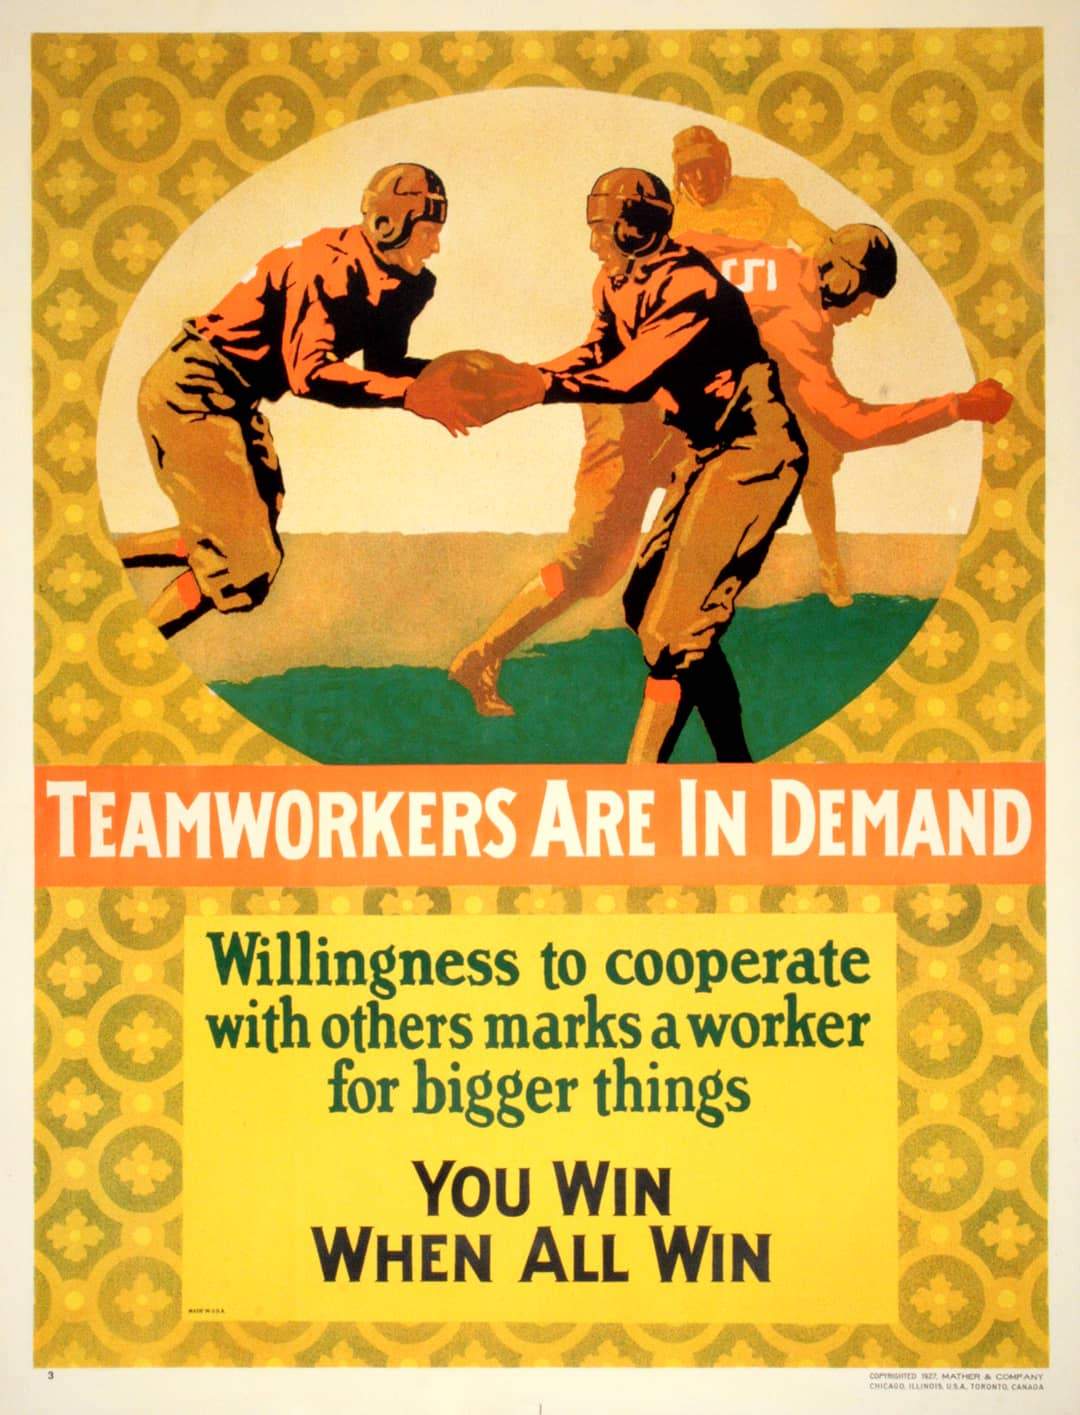 Original Mather Work Incentive Poster  1927 - Teamworkers Are in Demand - Football